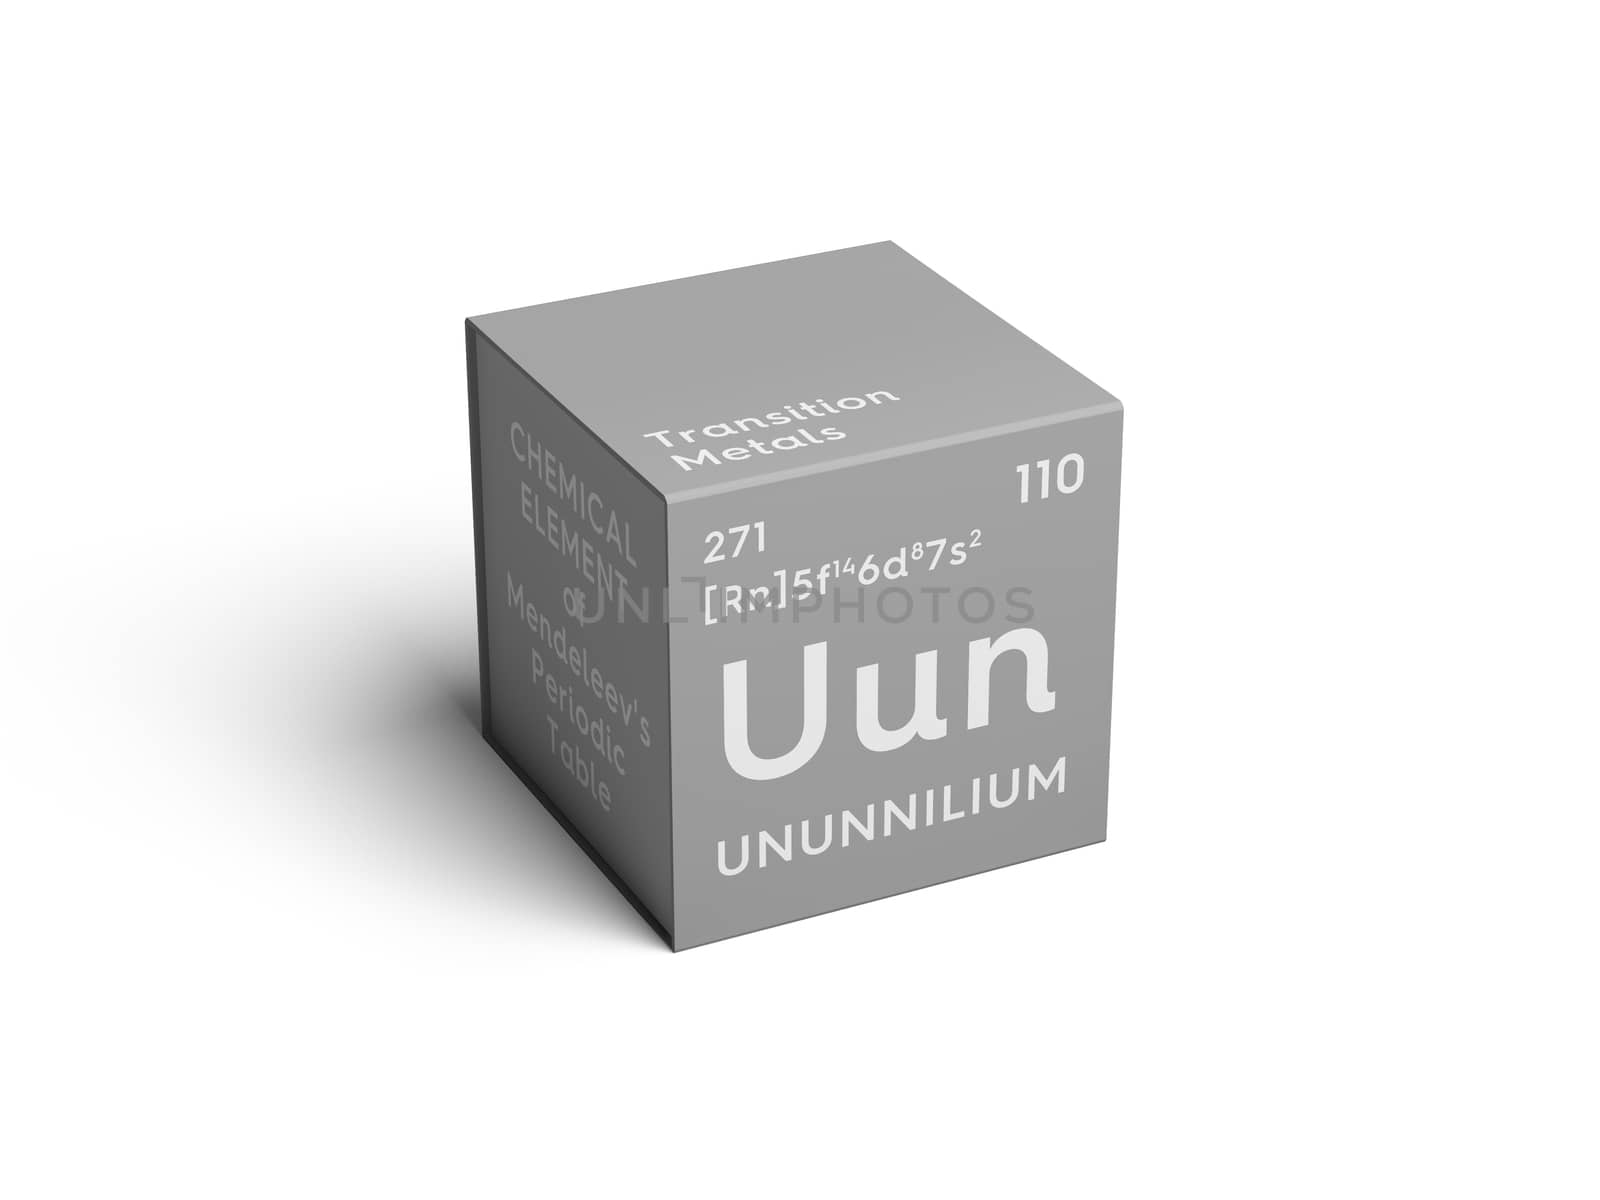 Ununnilium. Transition metals. Chemical Element of Mendeleev's P by sanches812